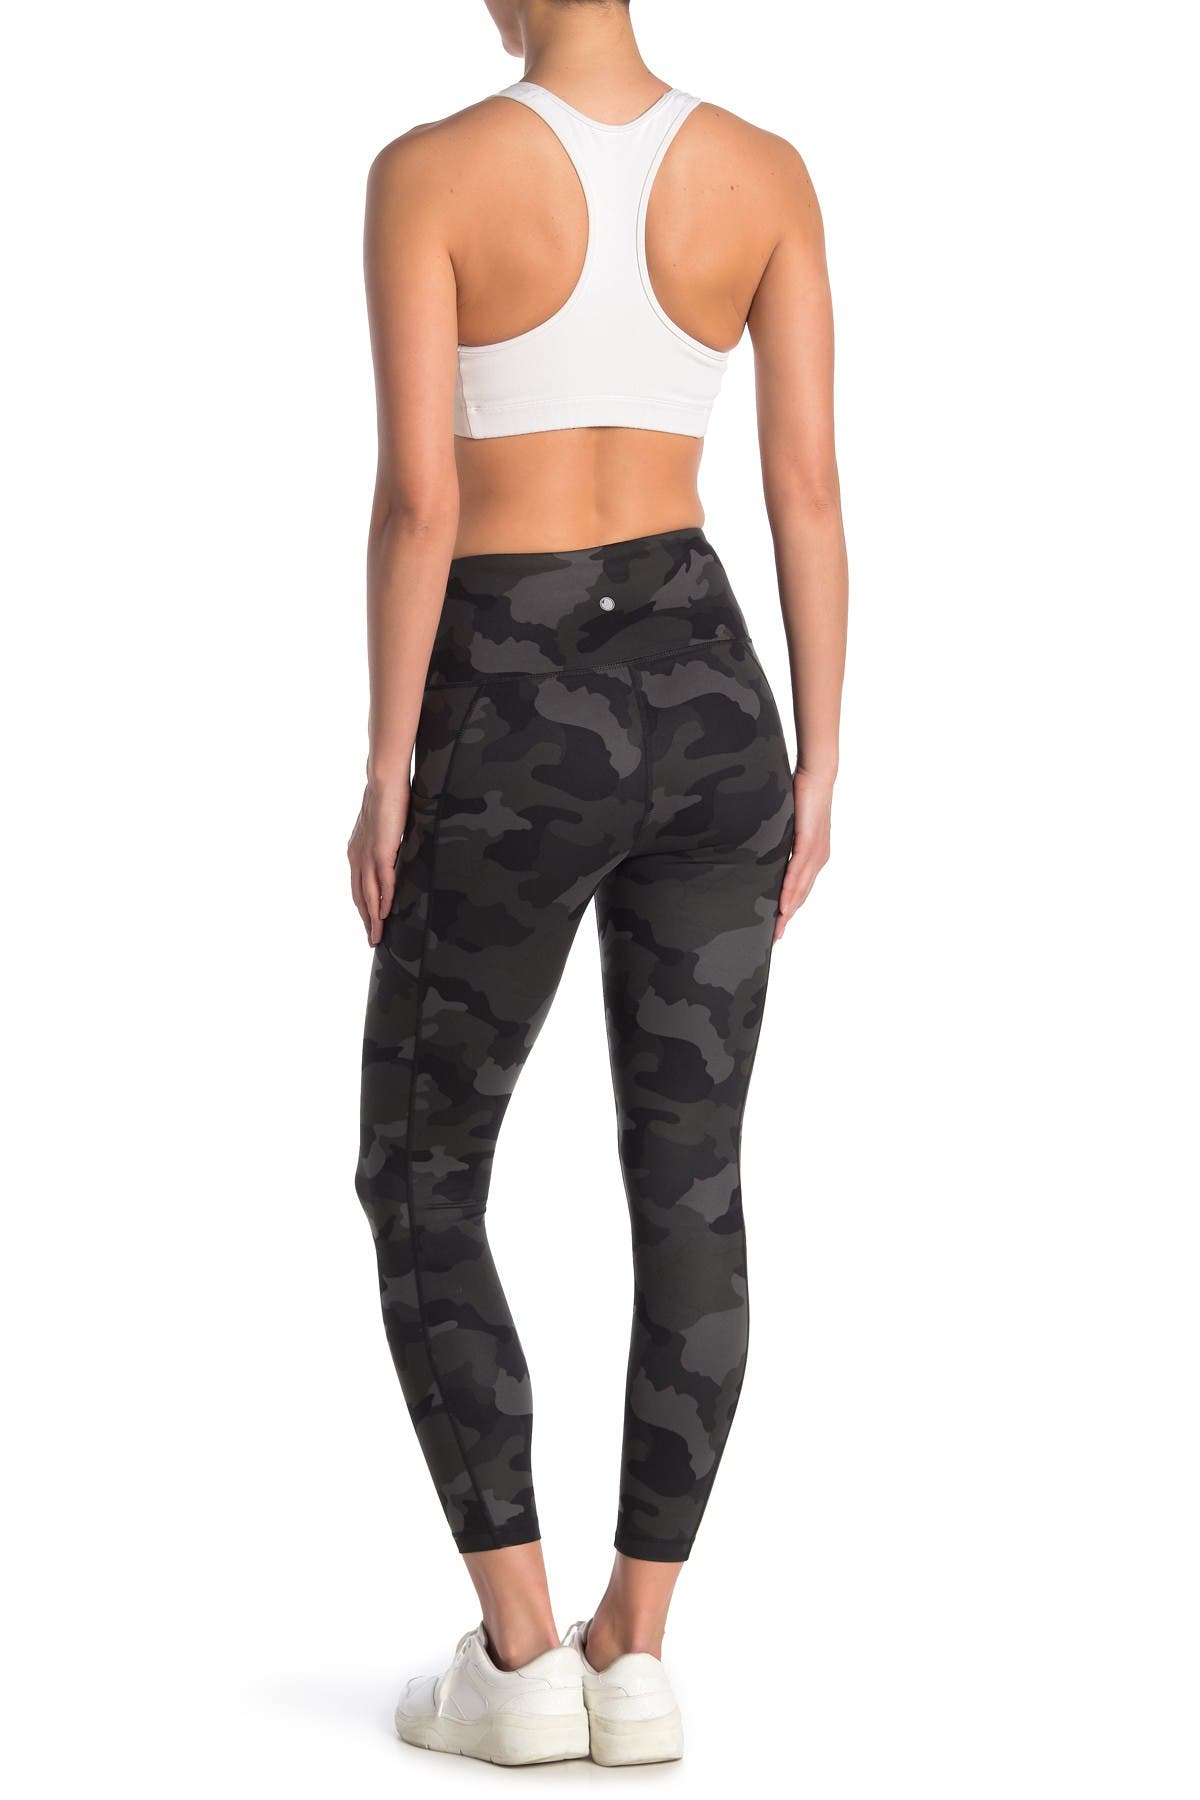 90 Degree By Reflex | Yogalicious Lux Camo High Waisted Side Pocket ...